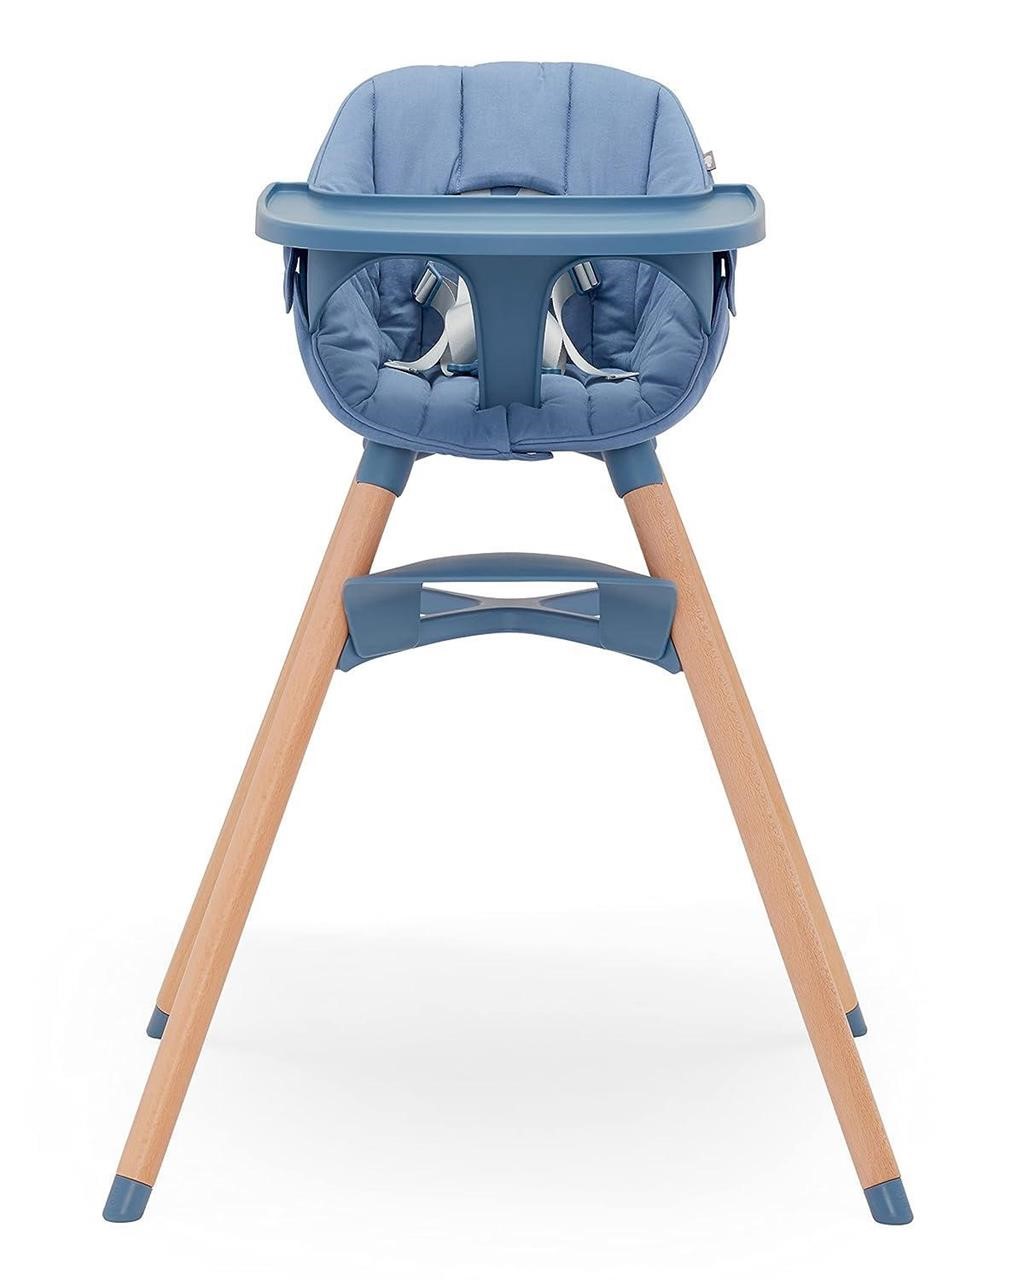 USED-3-in-1 Convertible High Chair